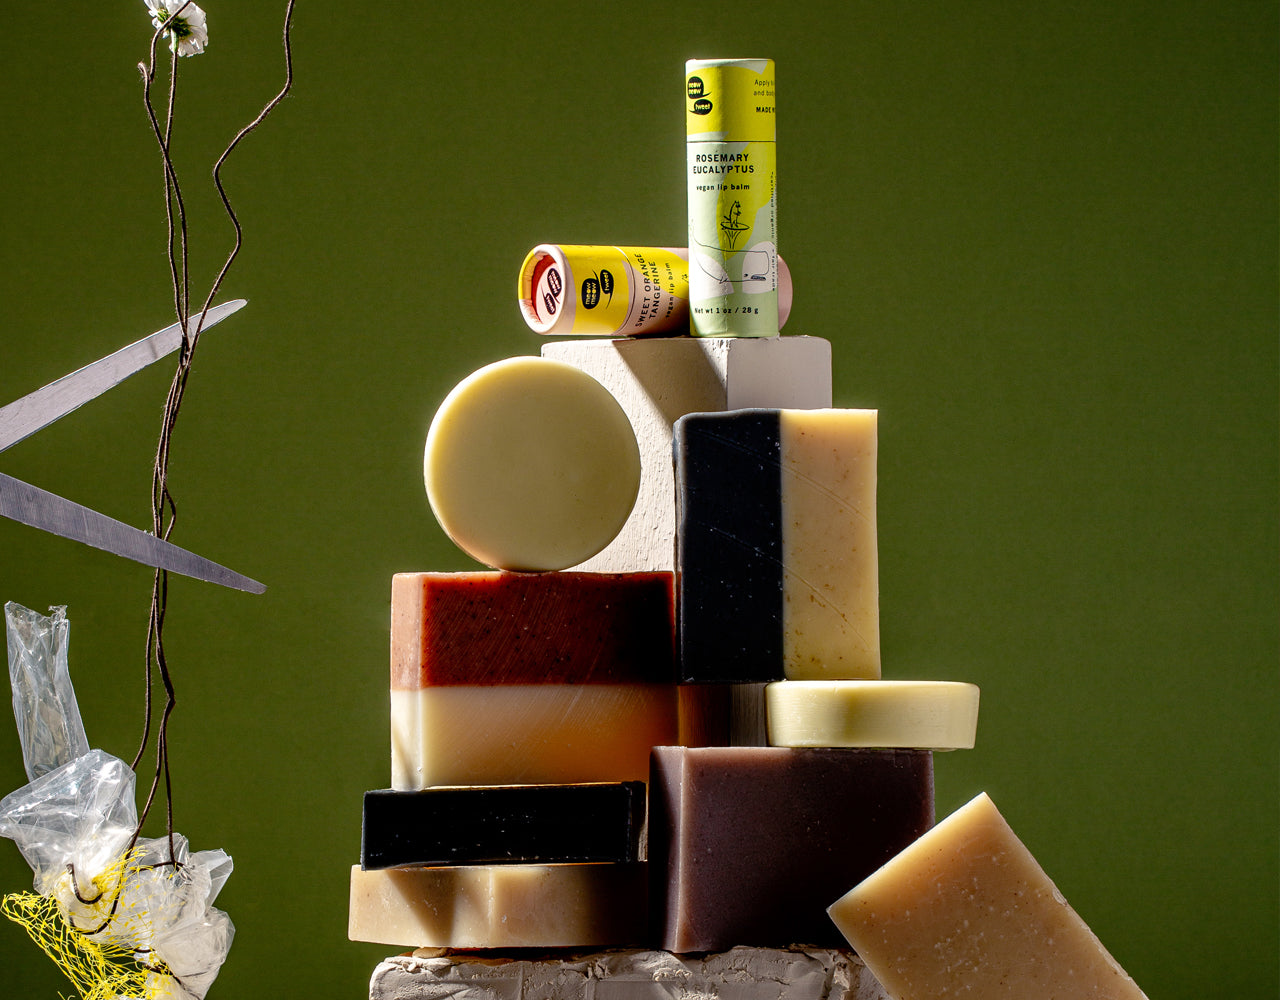 our soaps and lip balms stand in a tower against a pine backdrop, with a pair of scissors on the left open and ready to cut the stem of a flower that's connected to plastic waste